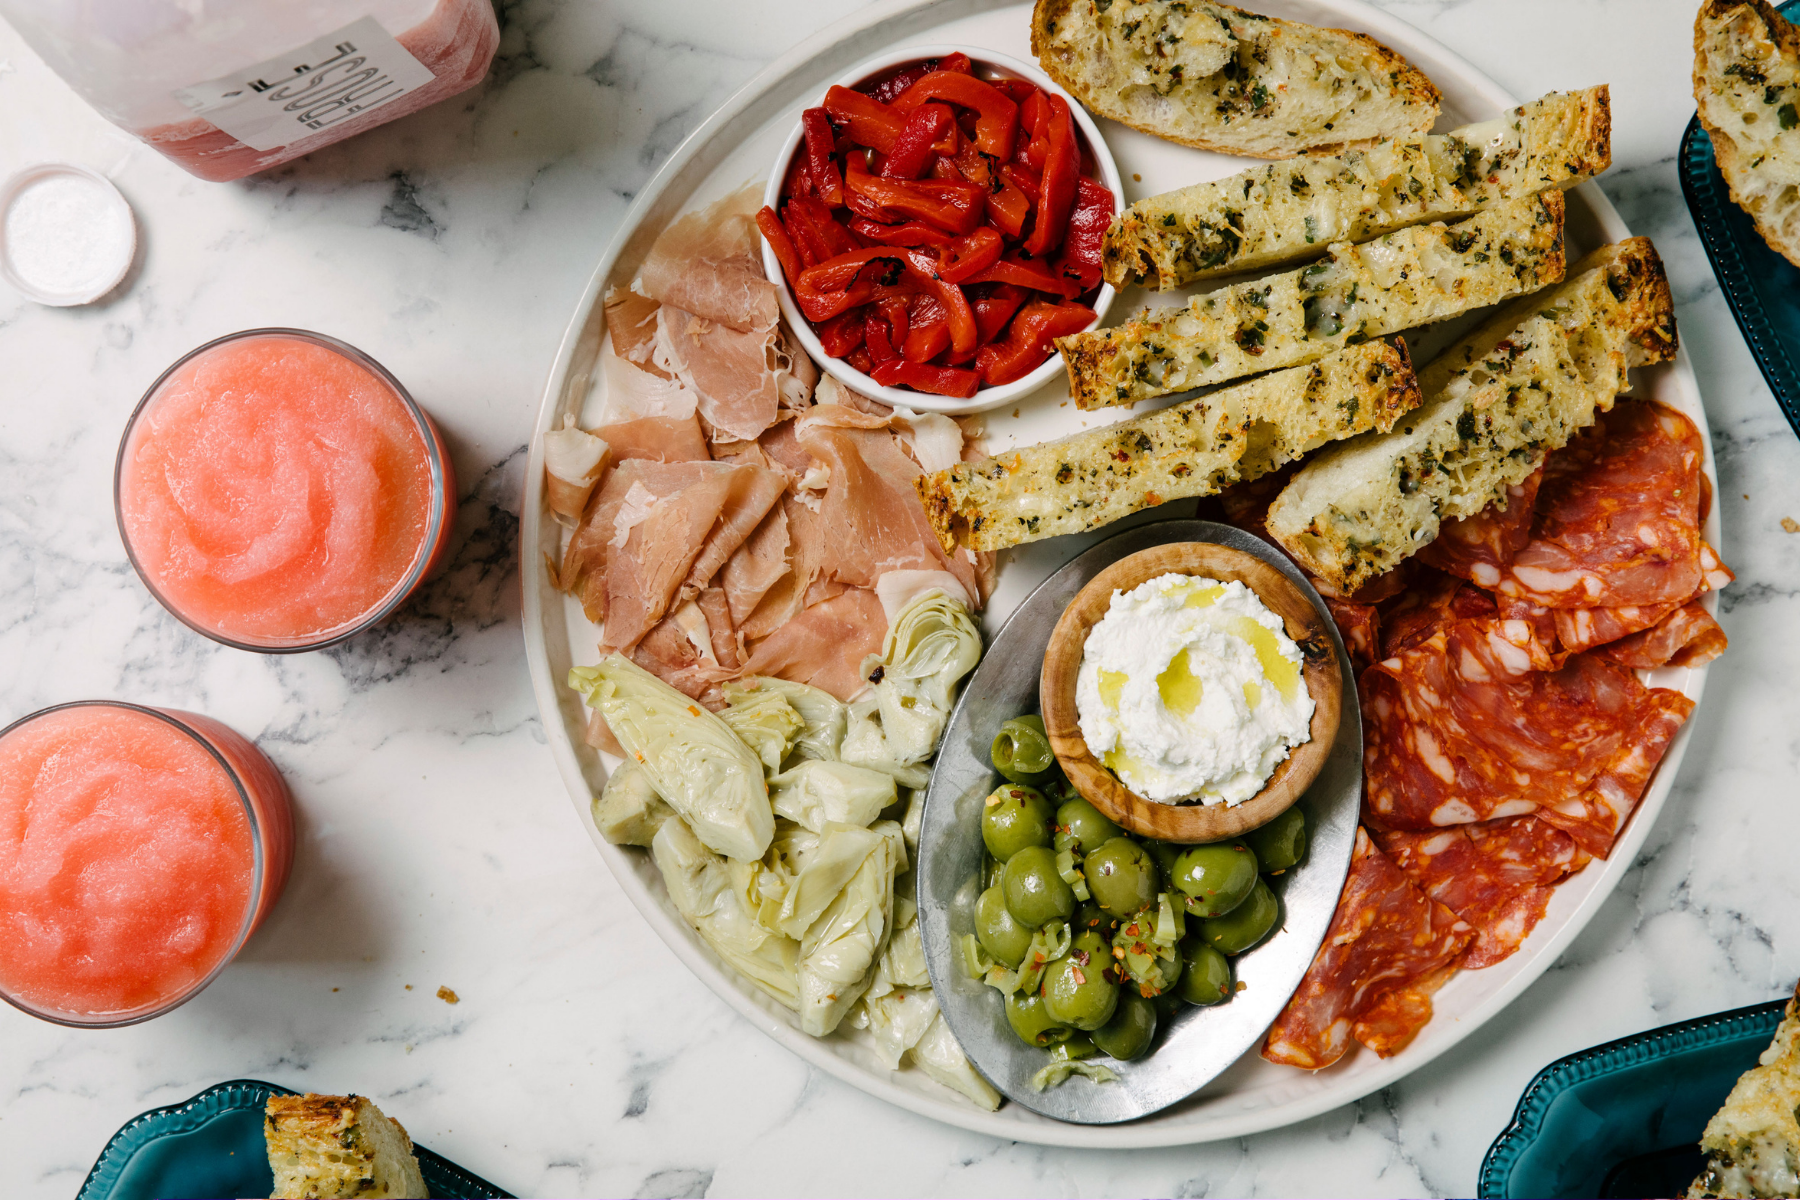 A big platter filled with bread, olives, spreads, cured meats, and cheeses; beside it, a glass of frozen rosé.